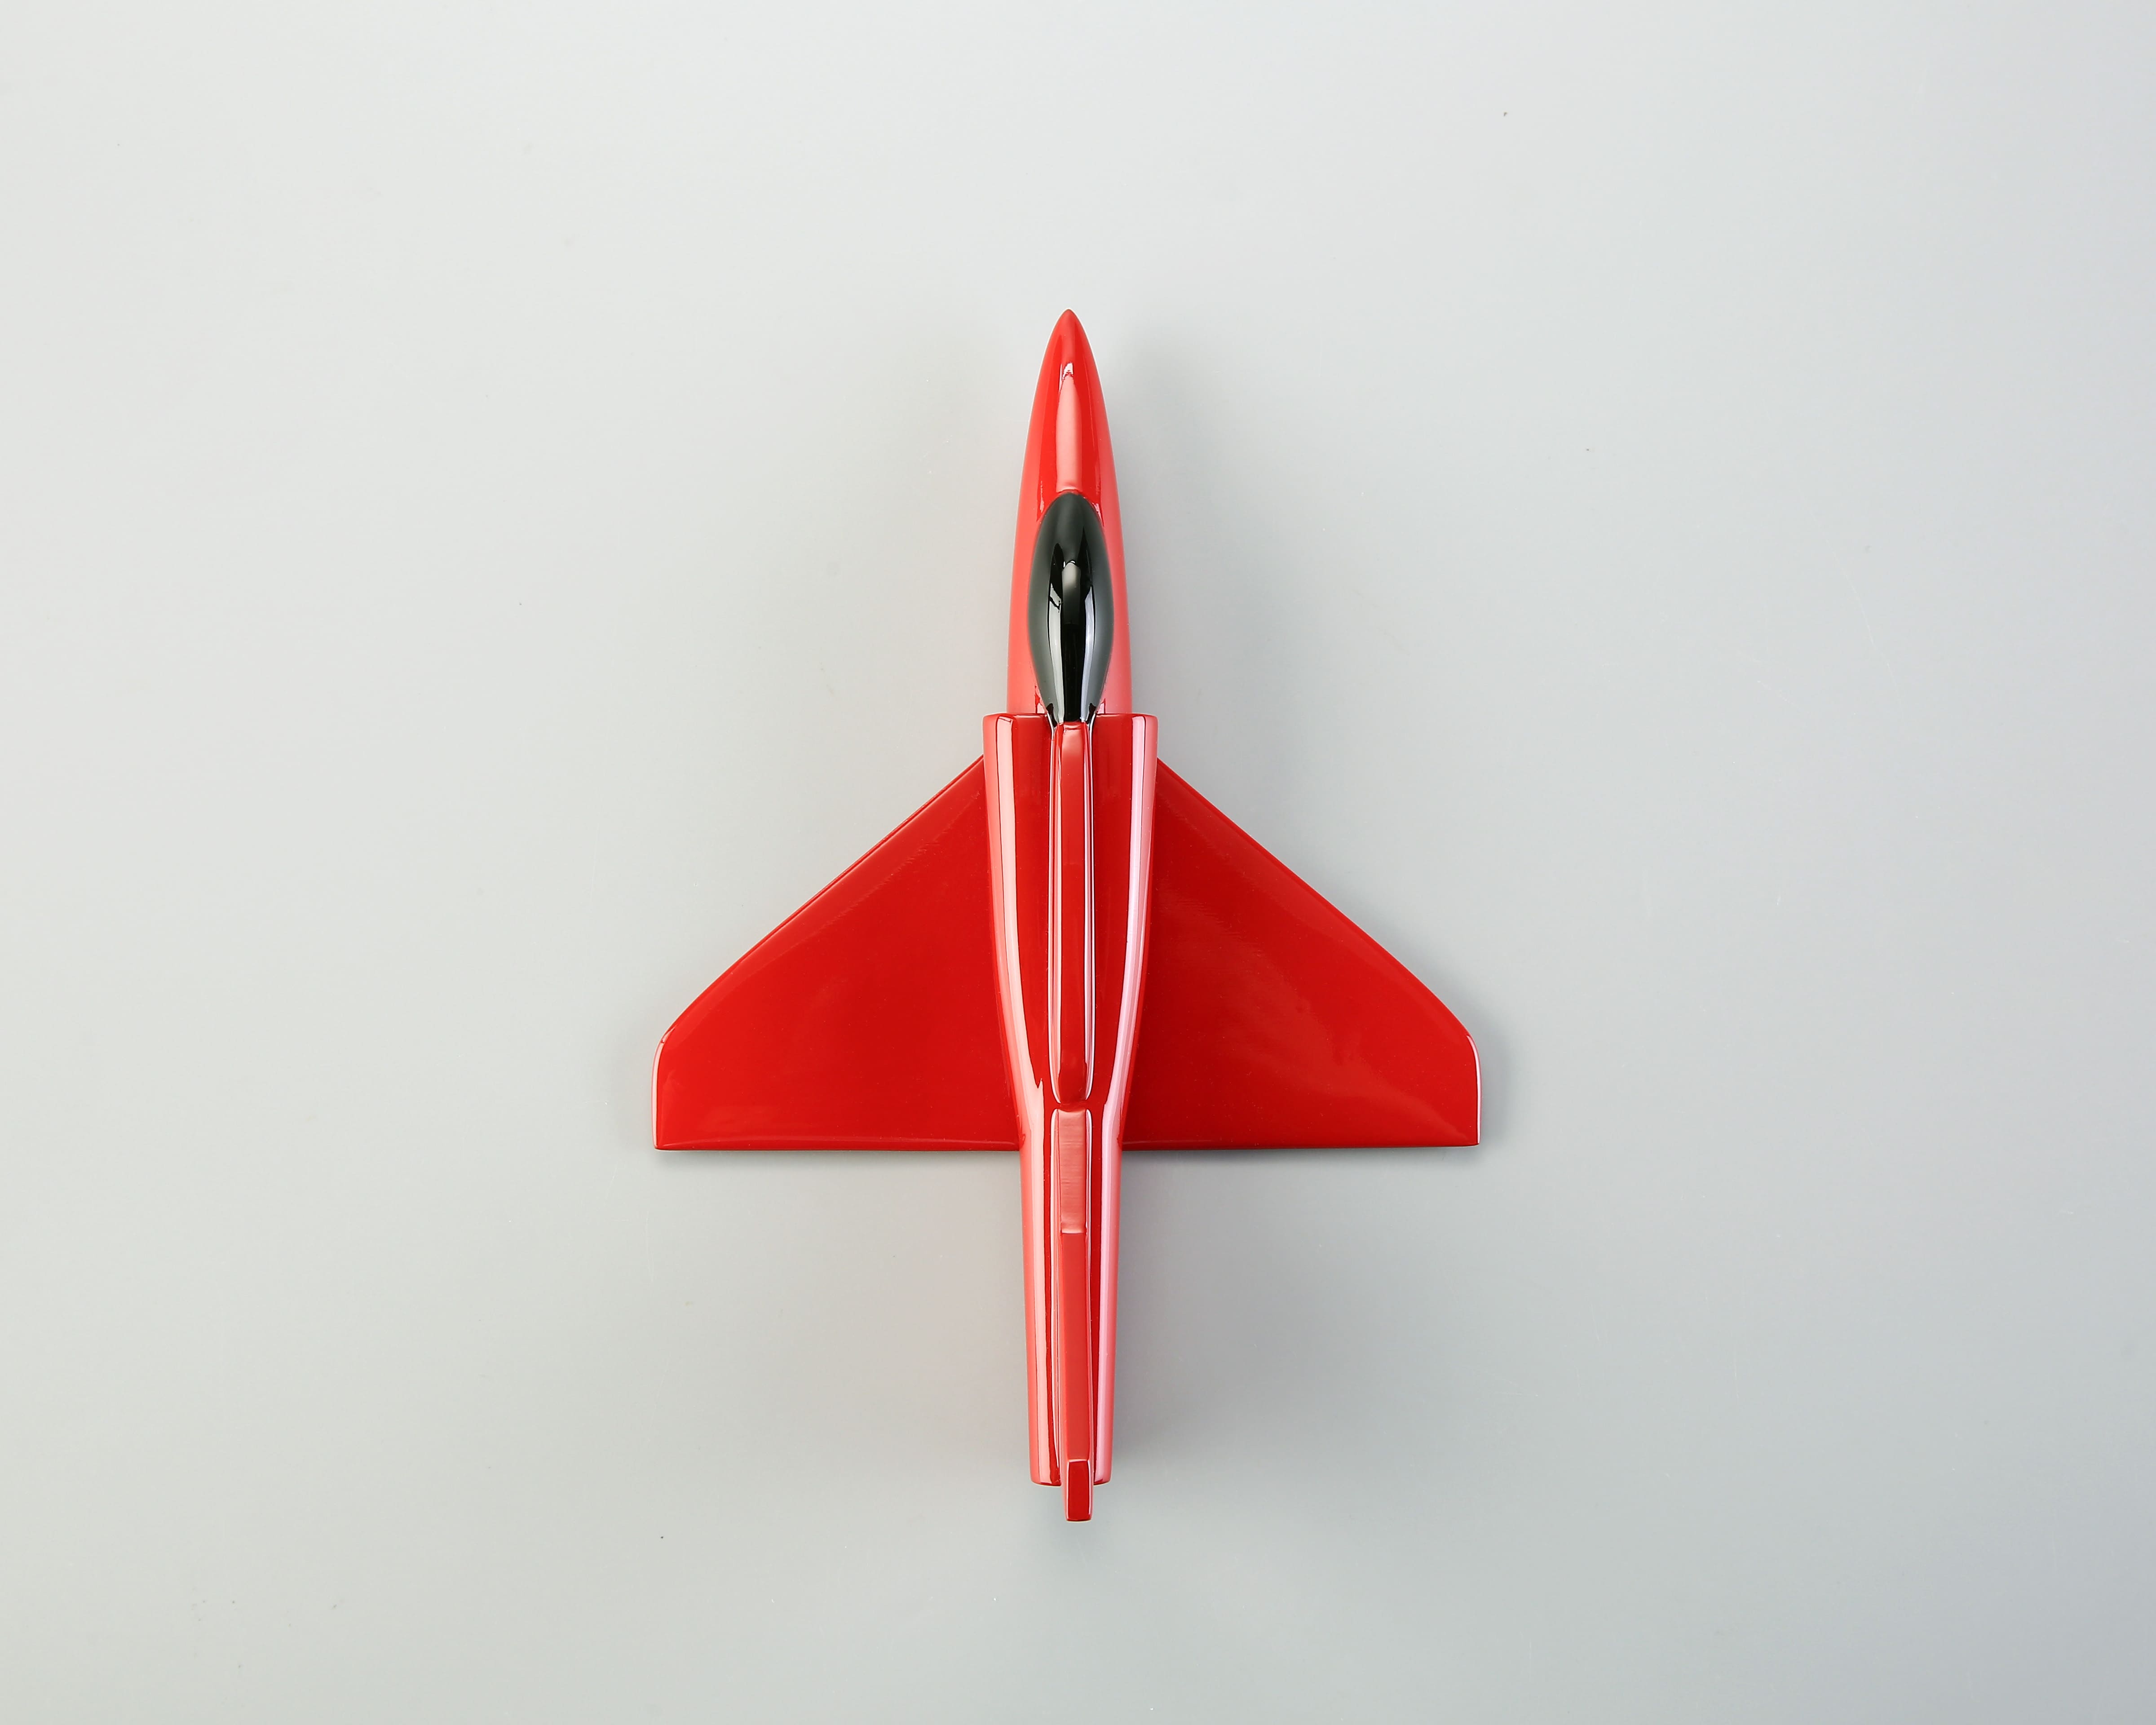 3DSPRO 3D Printed Airplane (Red Gloss Painted)